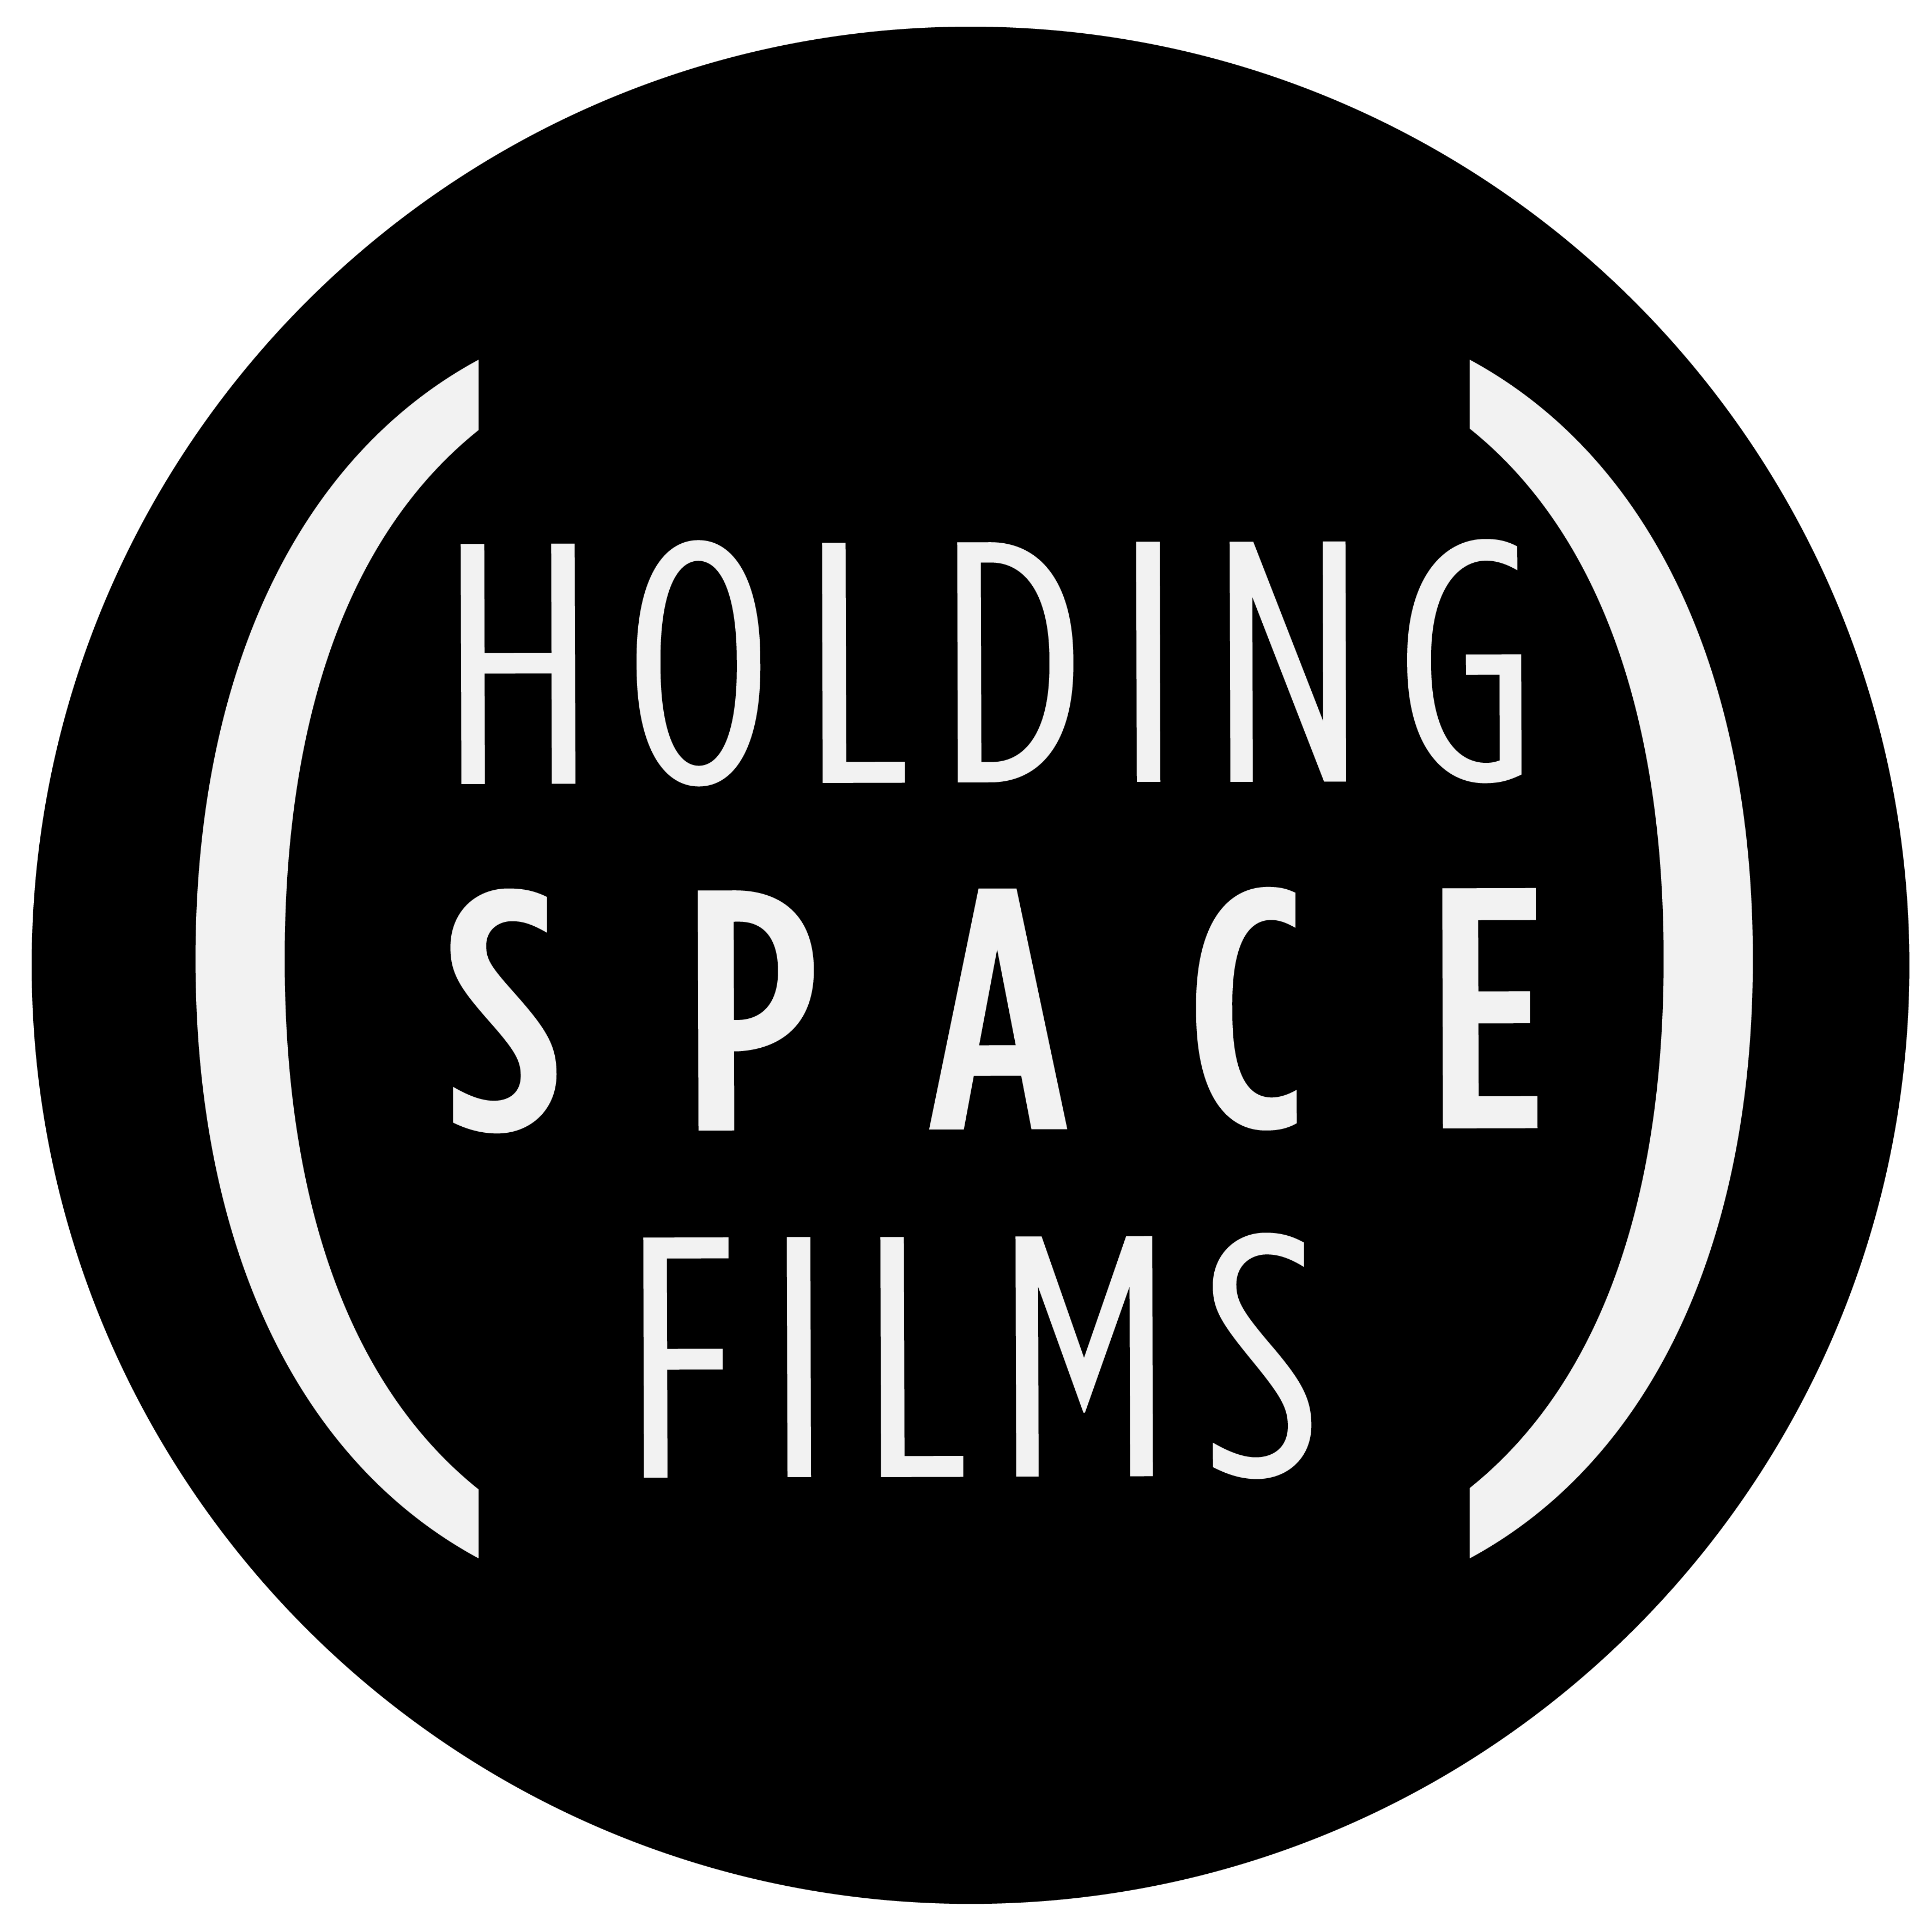 Holding Space Films logo